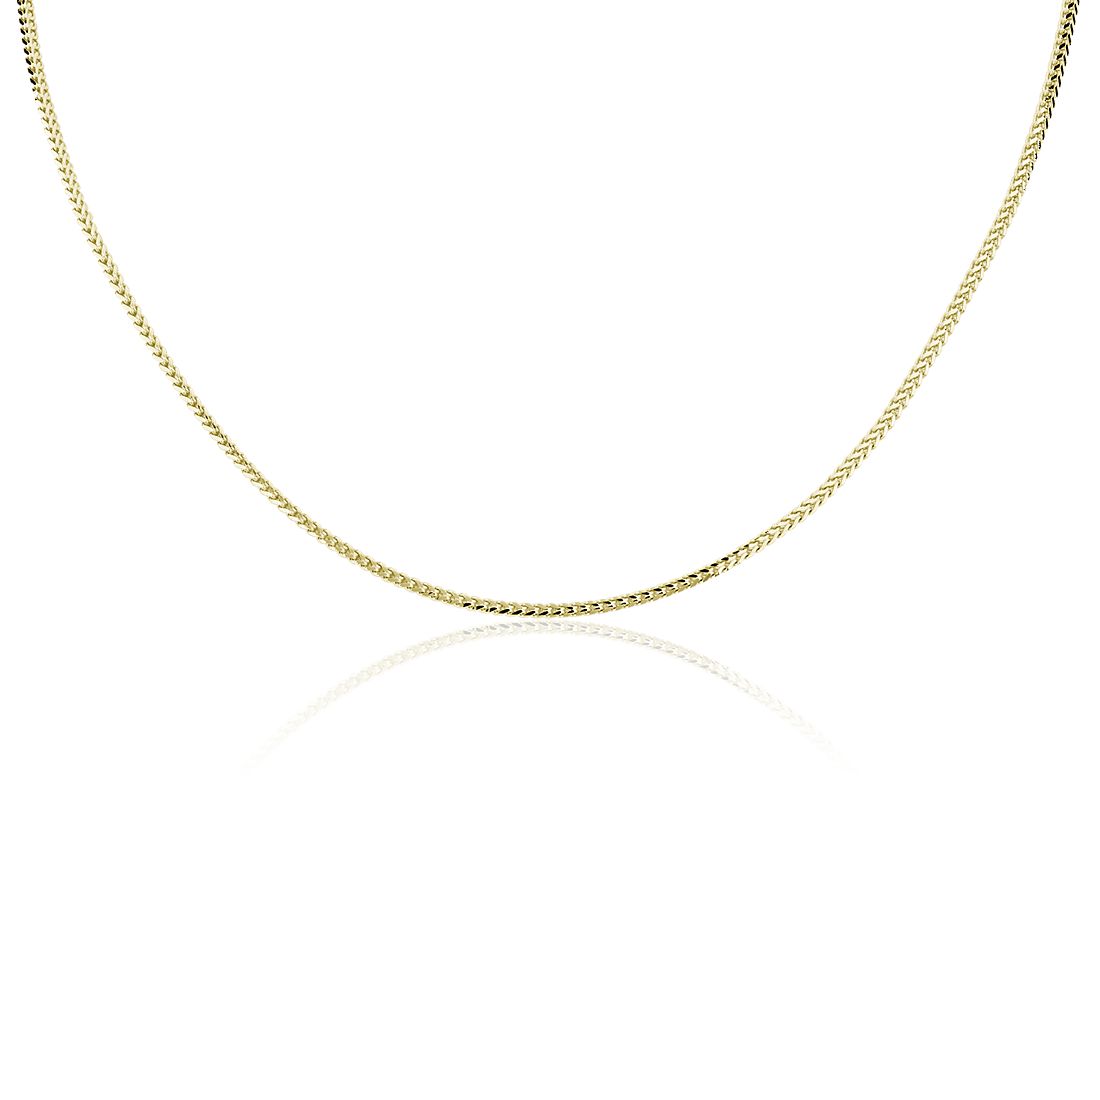 Franco Chain in 14k Yellow Gold (1.3 mm)